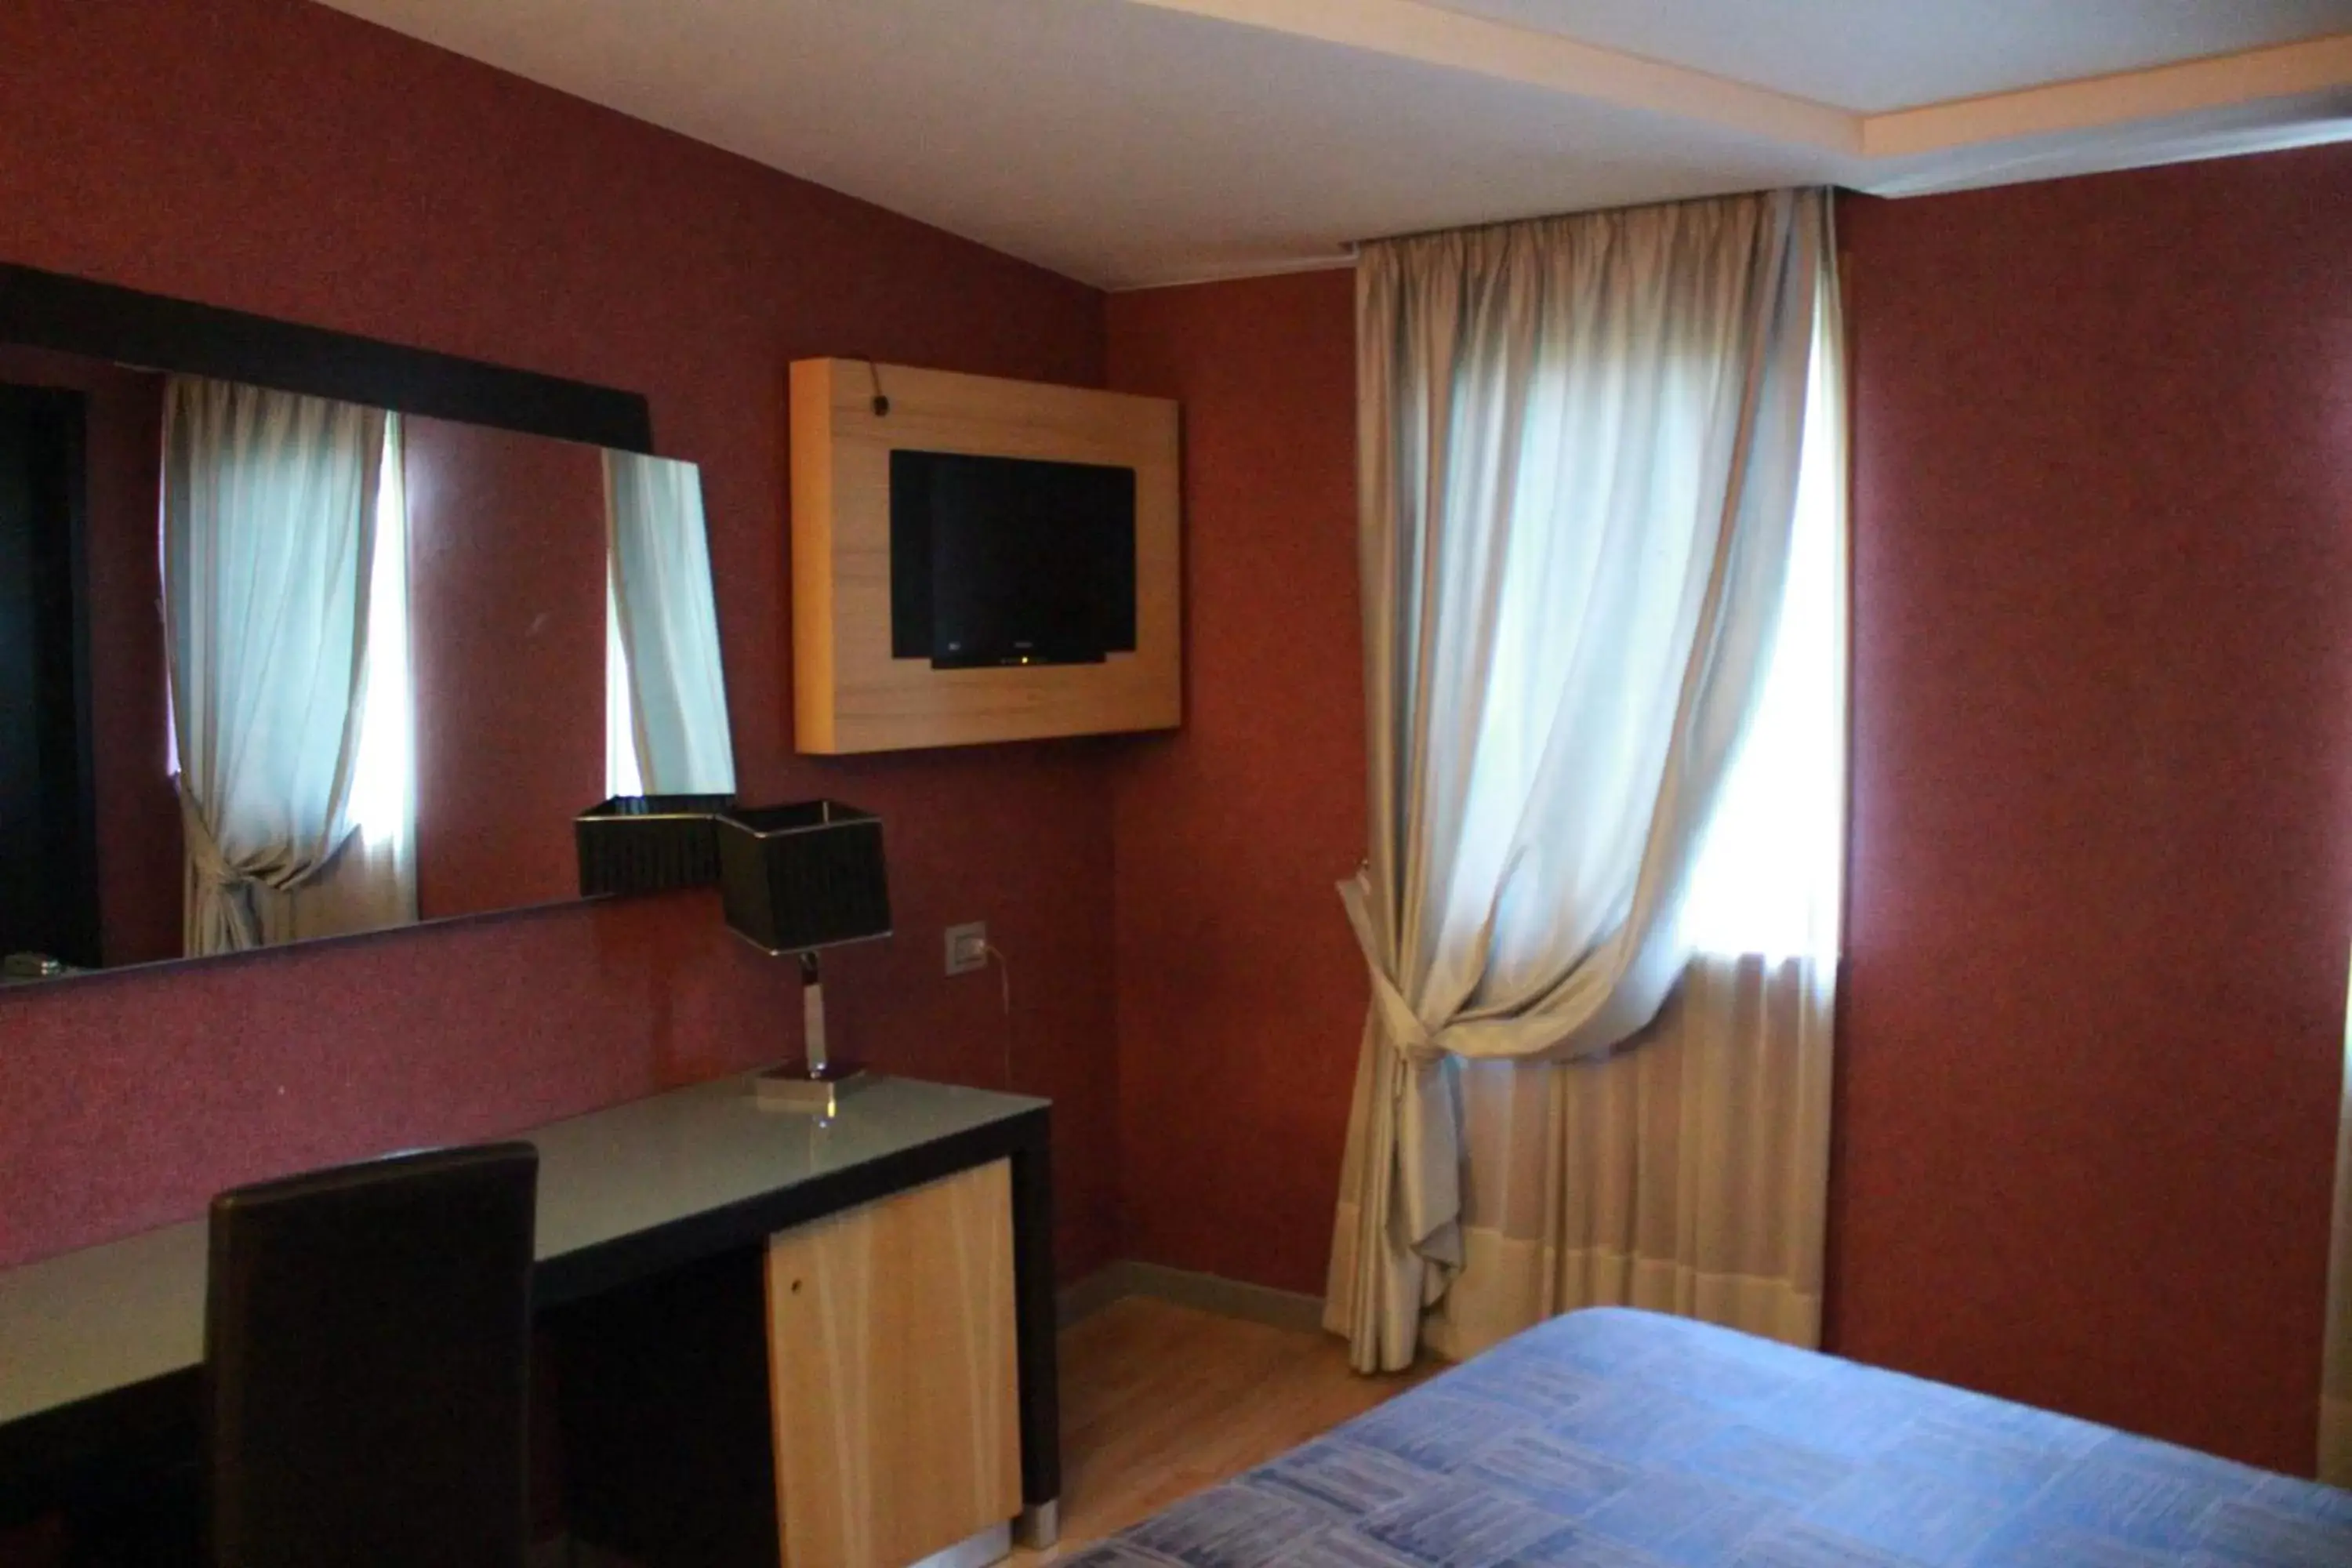 TV and multimedia, Room Photo in Hotel Ginepro